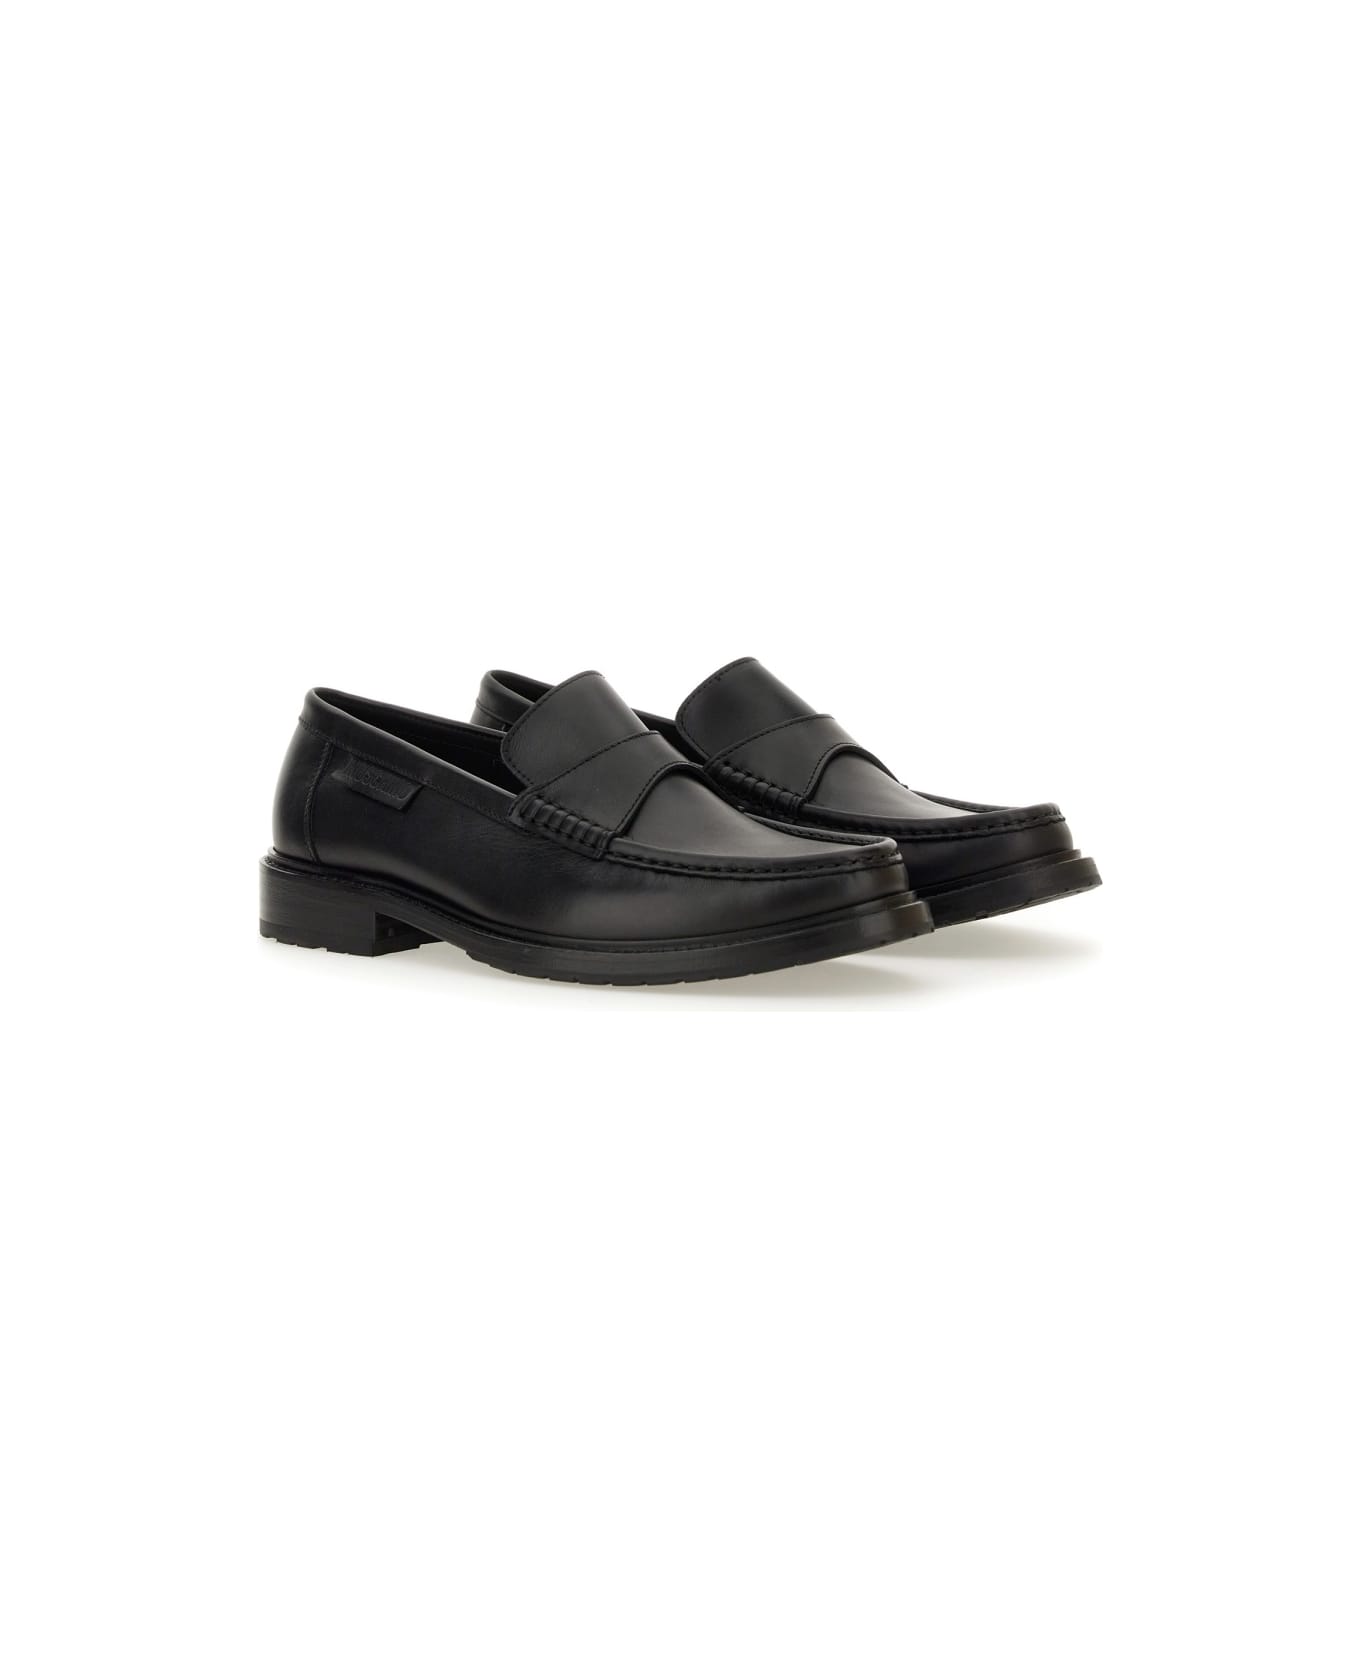 Moschino Leather Loafer - BLACK